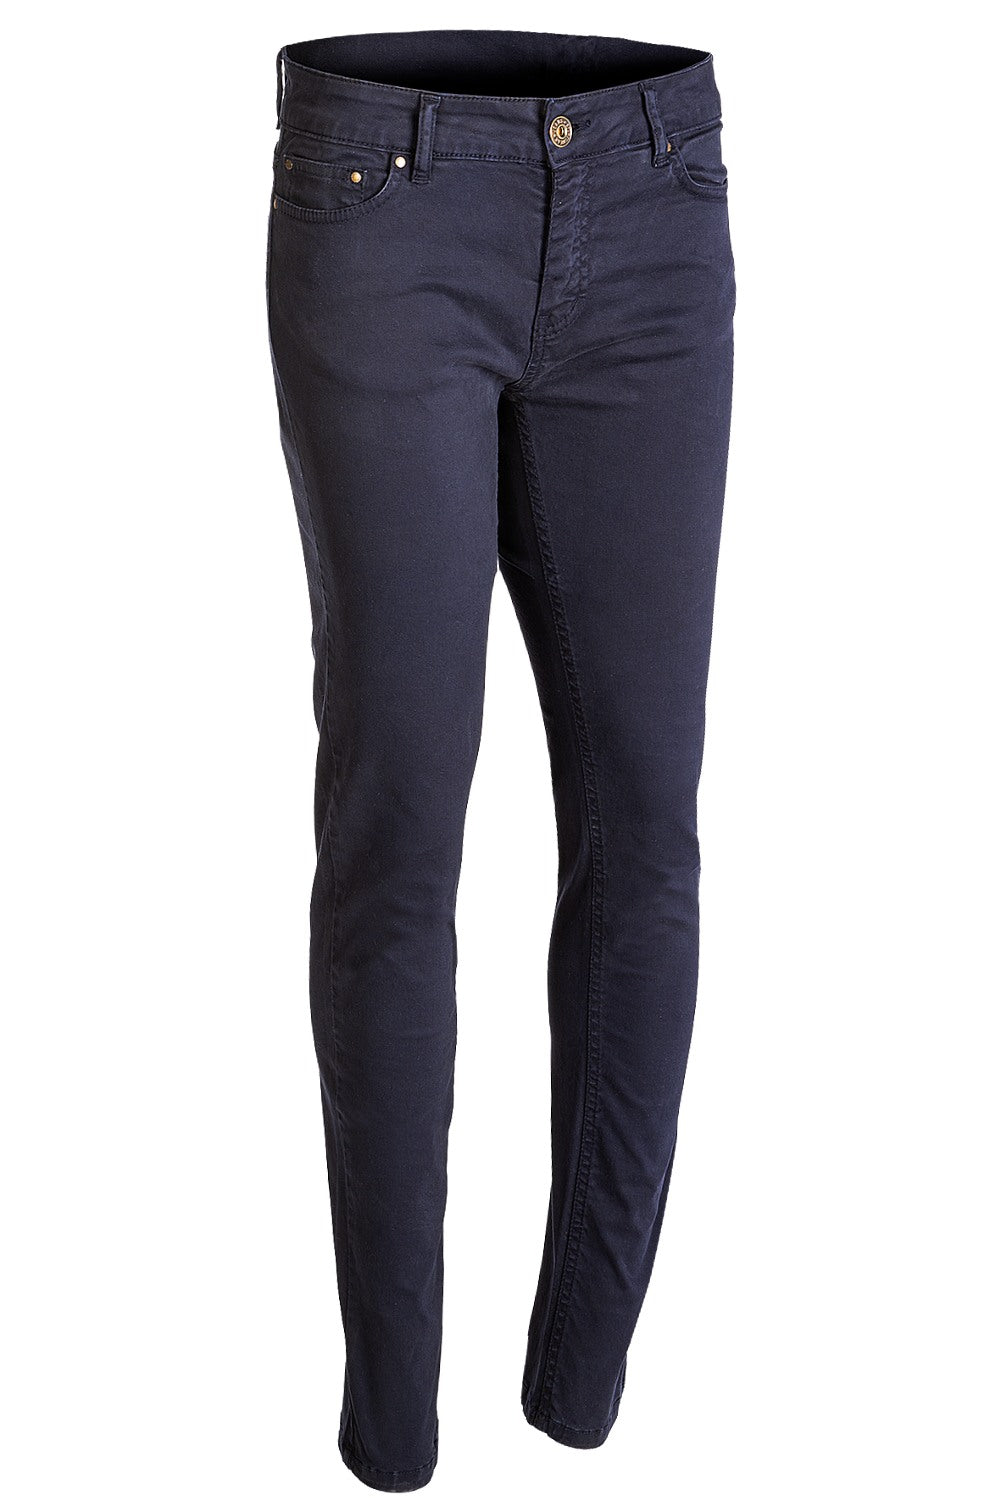 Baleno Womens Cotton Trousers in Navy 